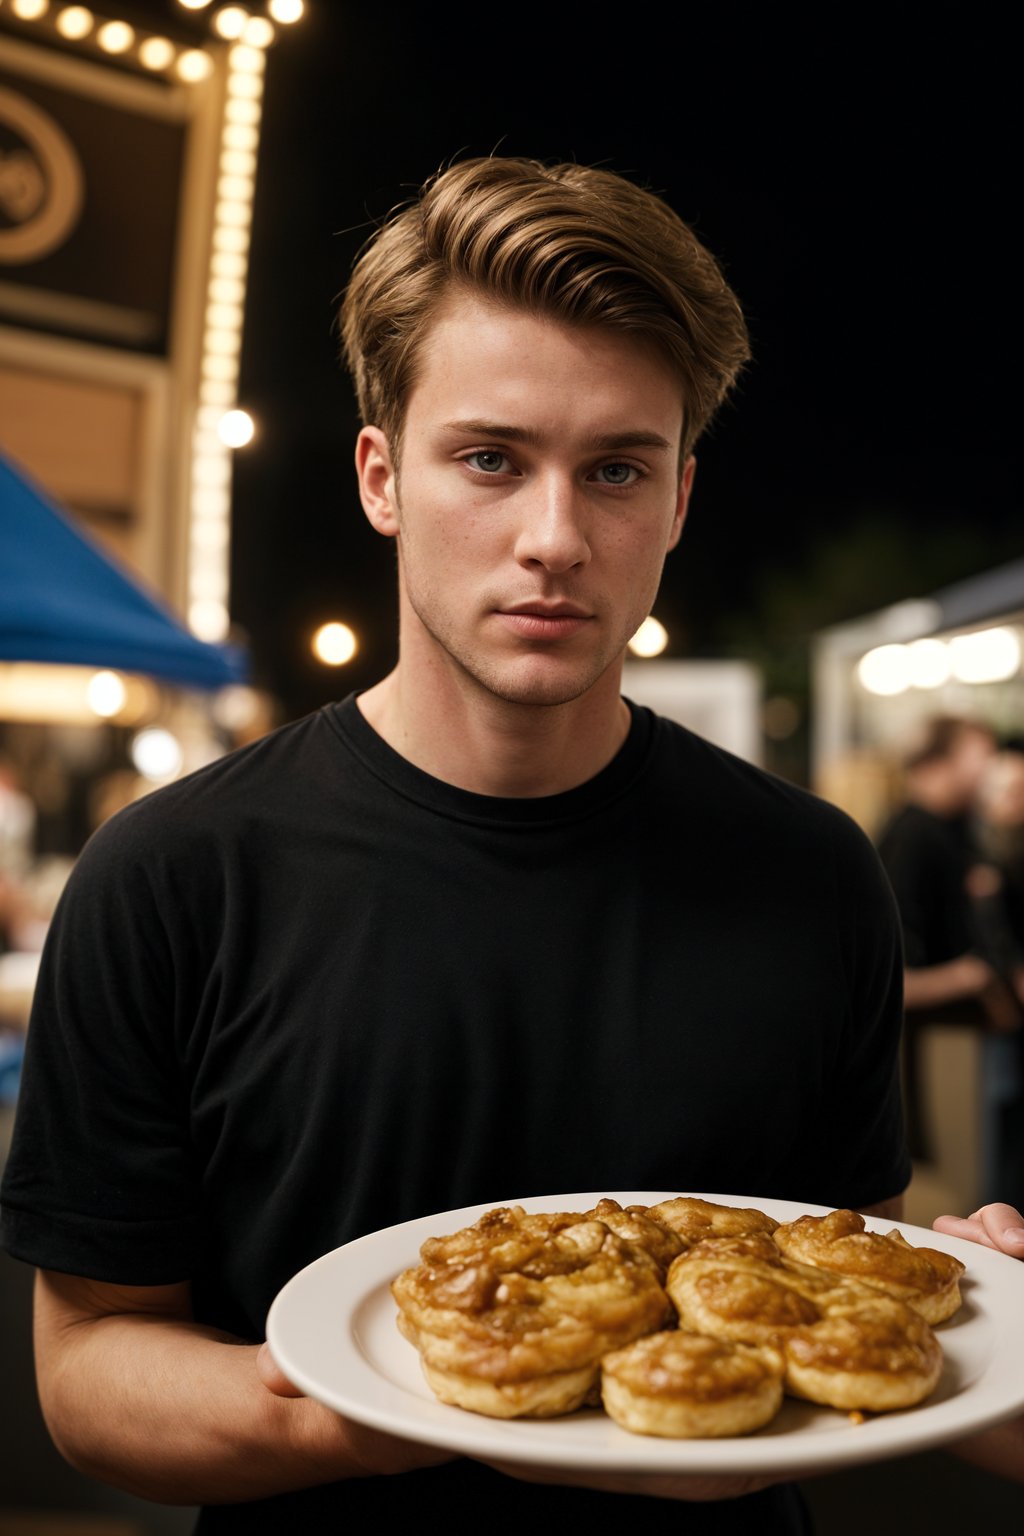 man at a pop-up food market at night, combining the love for street food with nightlife